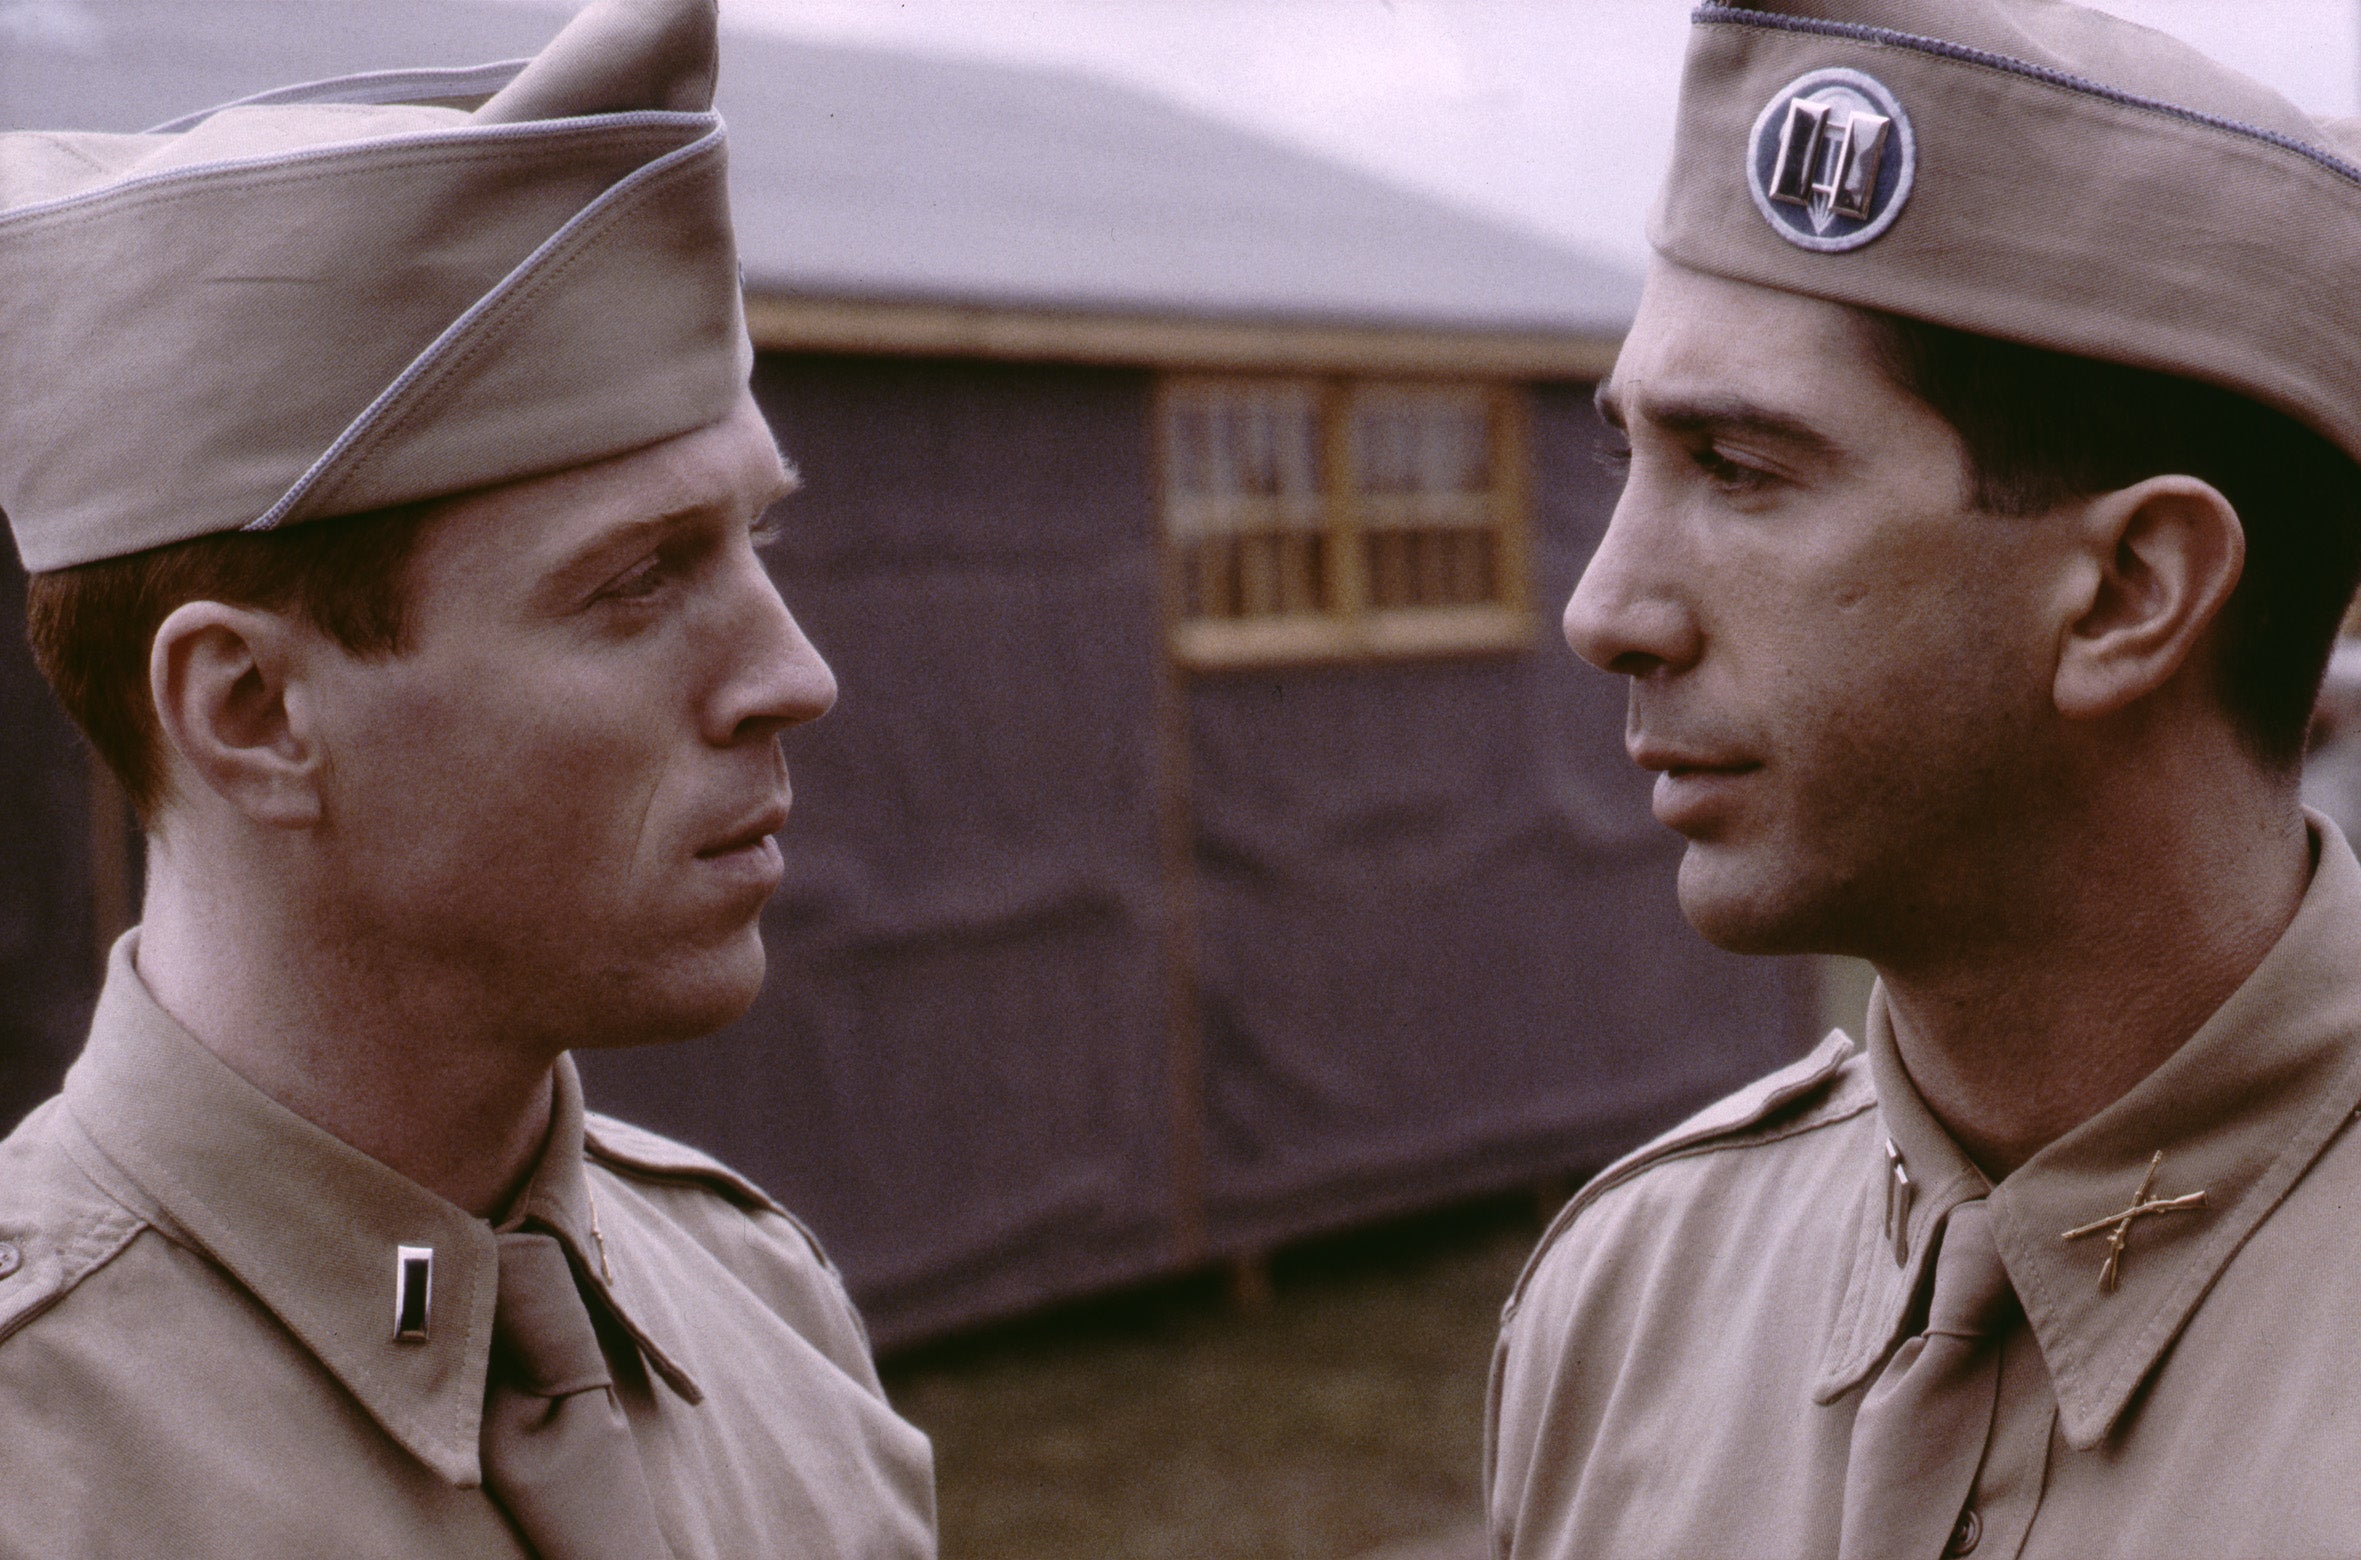 Damian Lewis and David Schwimmer portrayed the horrors of the Second World War in ‘Band of Brothers’